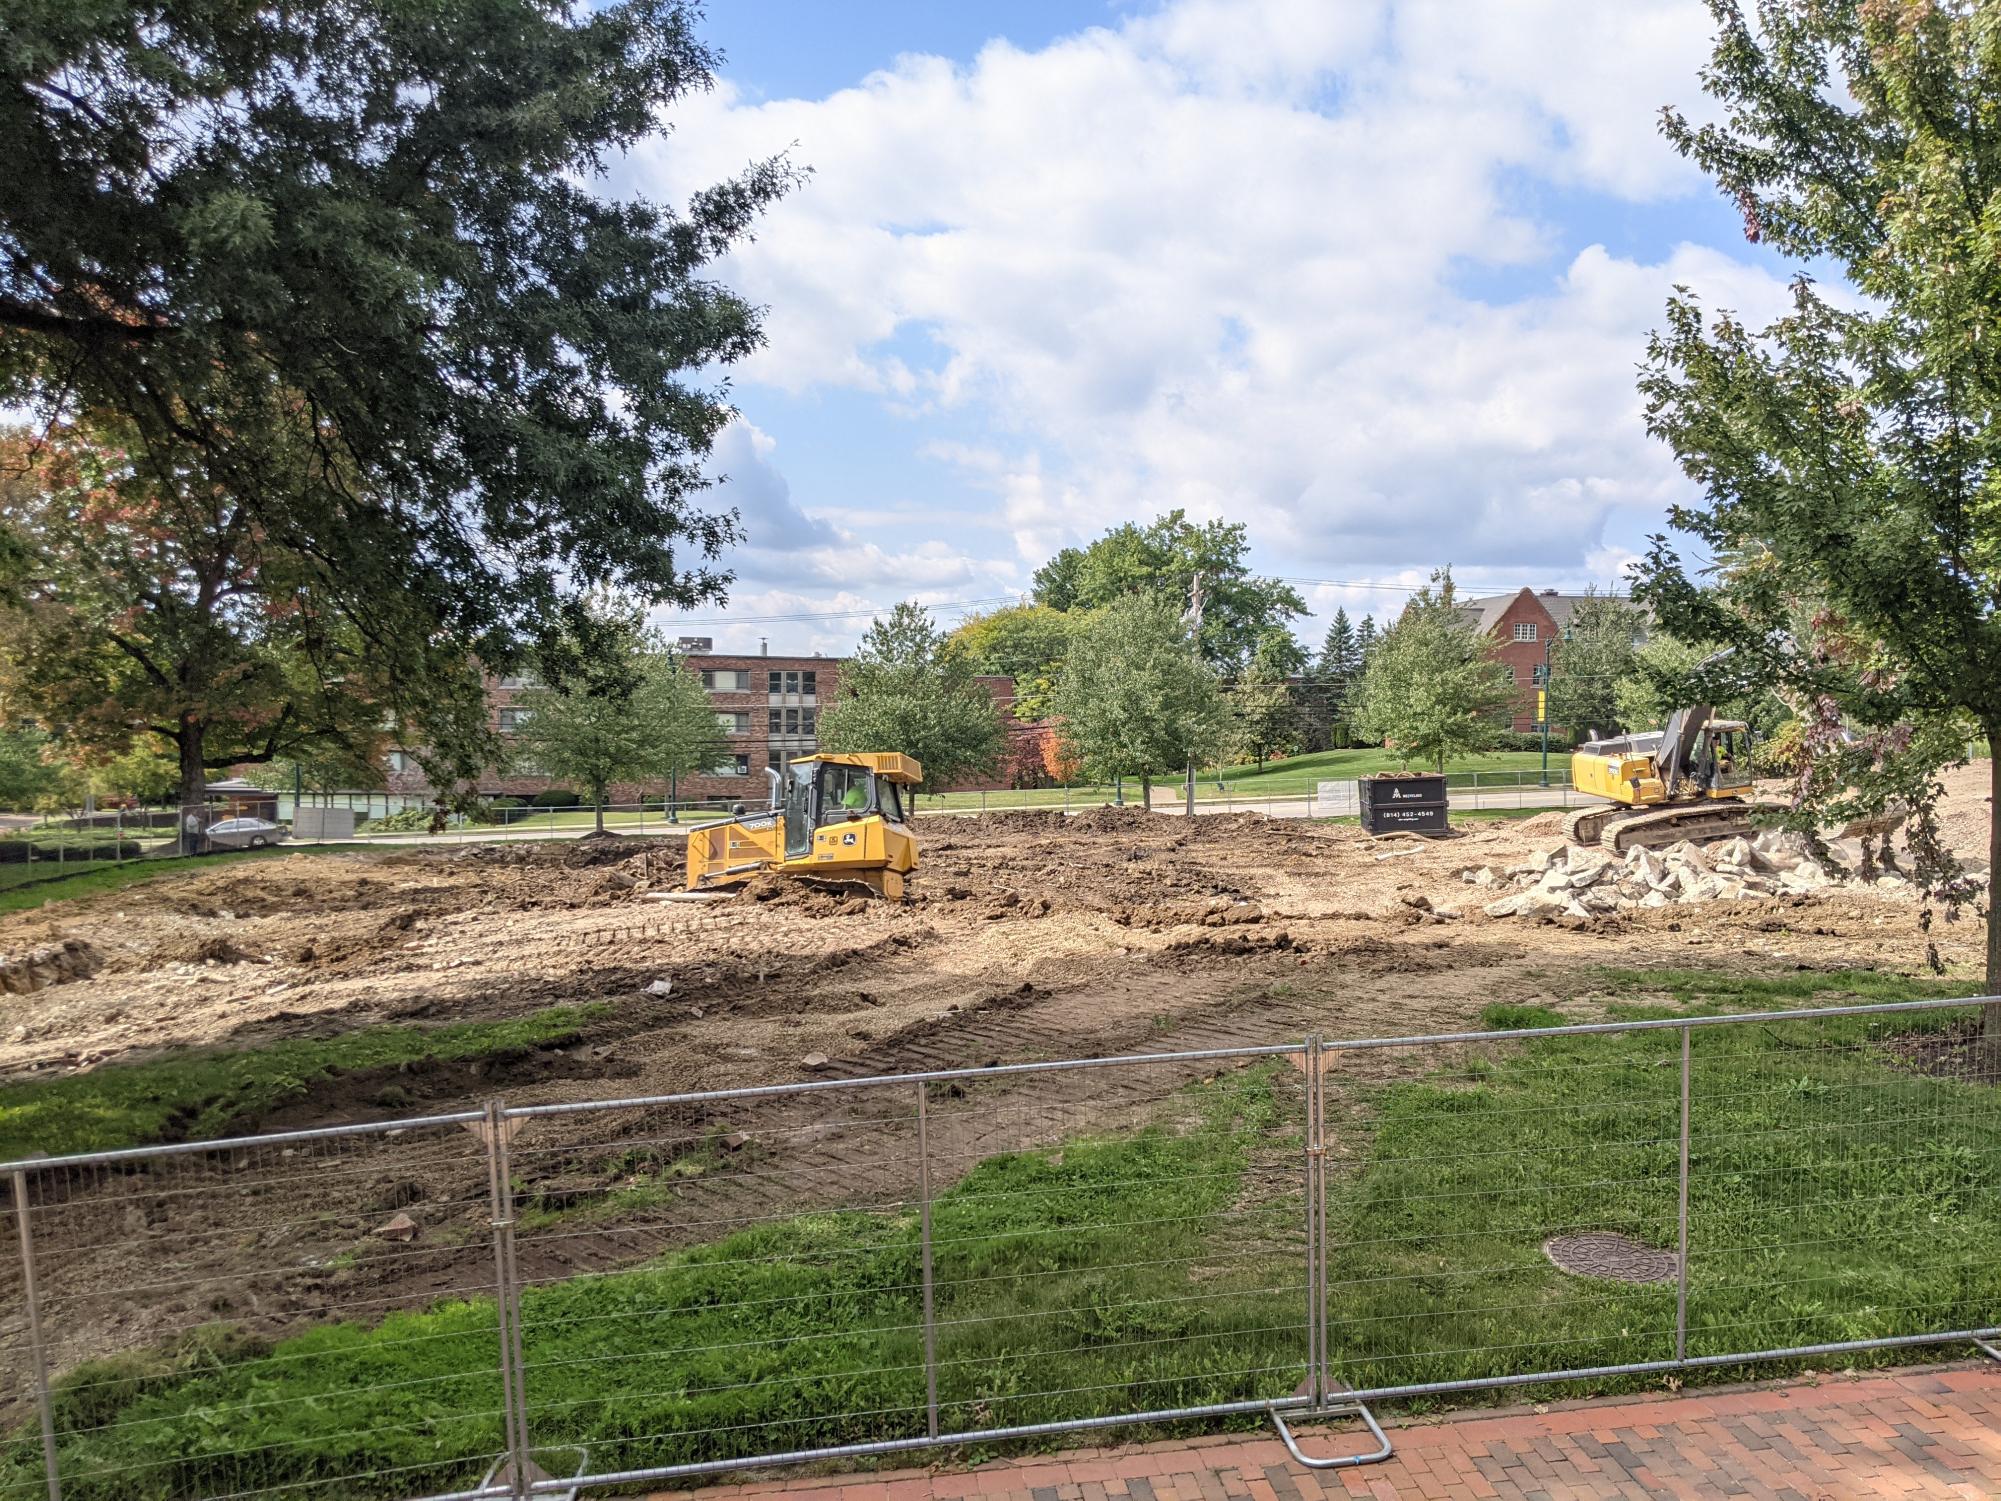 What was once the site of Caflisch Hall is now little more than a pit in the ground — though the dormitory is far from the only building to meet such a fate.